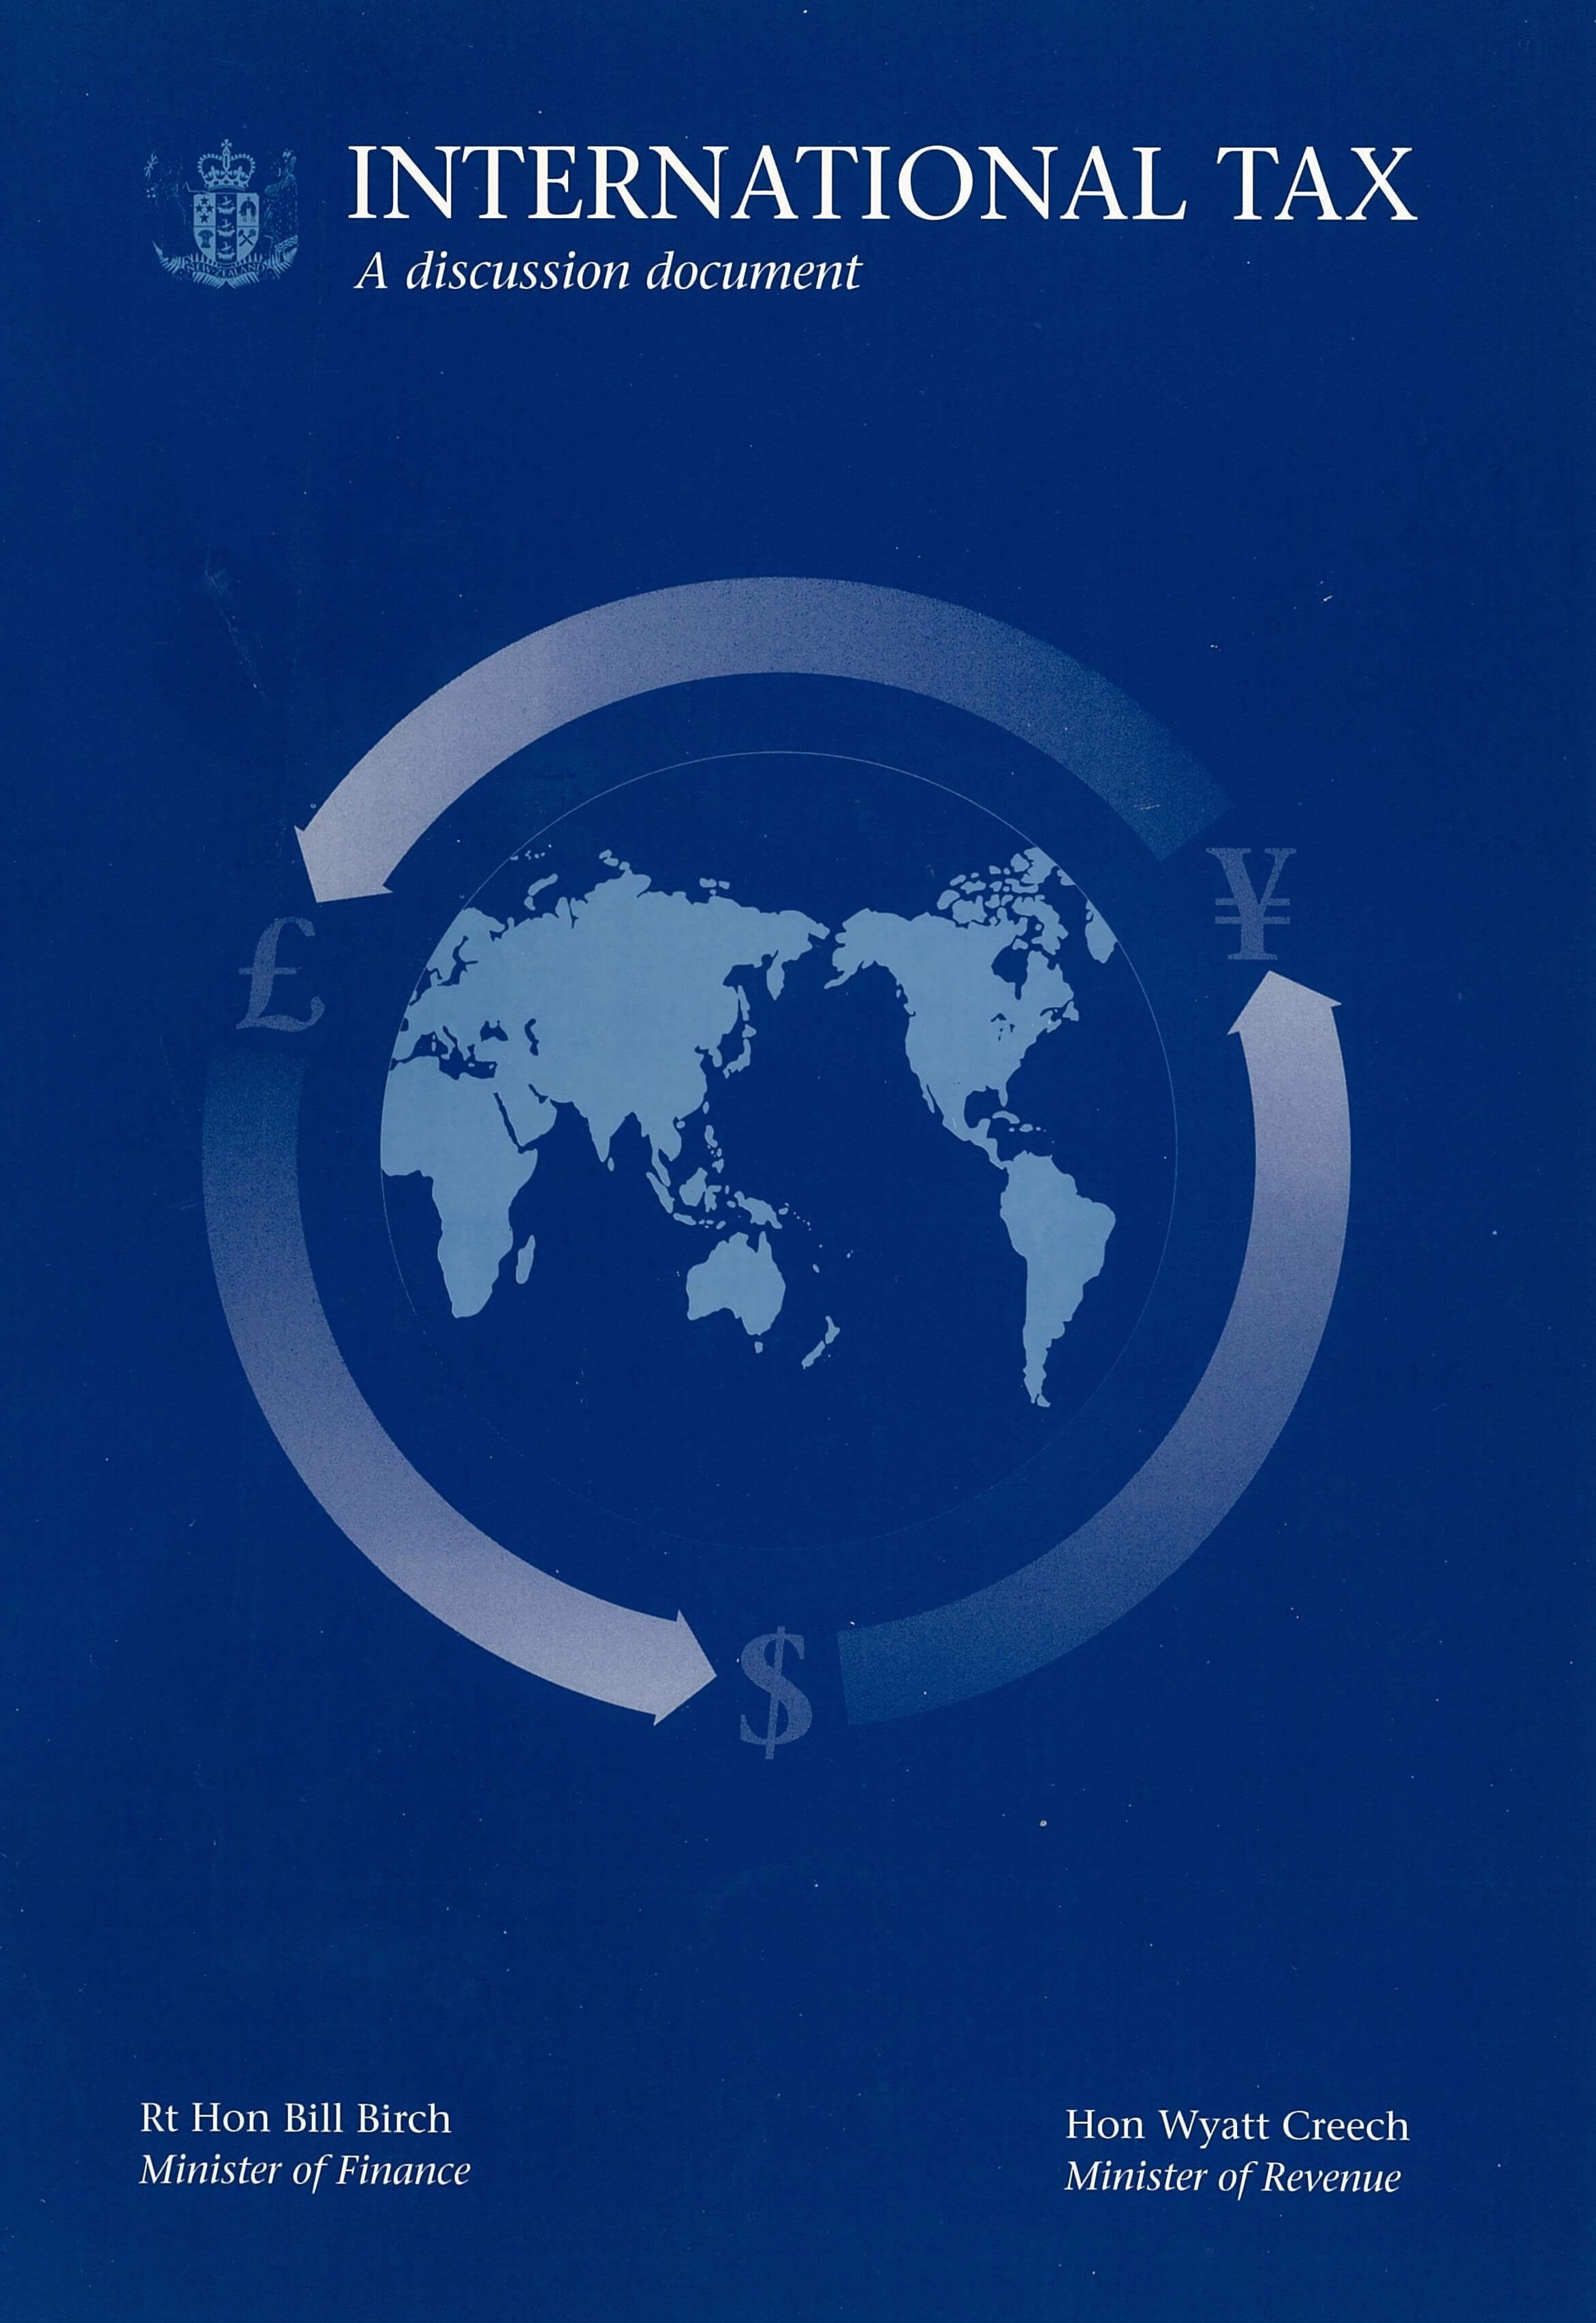 Front cover page with a dark blue background: Title - International tax - a discussion document, authors Rt Hon Bill Birch, Minister of Finance and Hon Wyatt Creech, Minister of Revenue. Blue background with New Zealand coat of arms and a map of the world with arrows showing money flowing around the world.